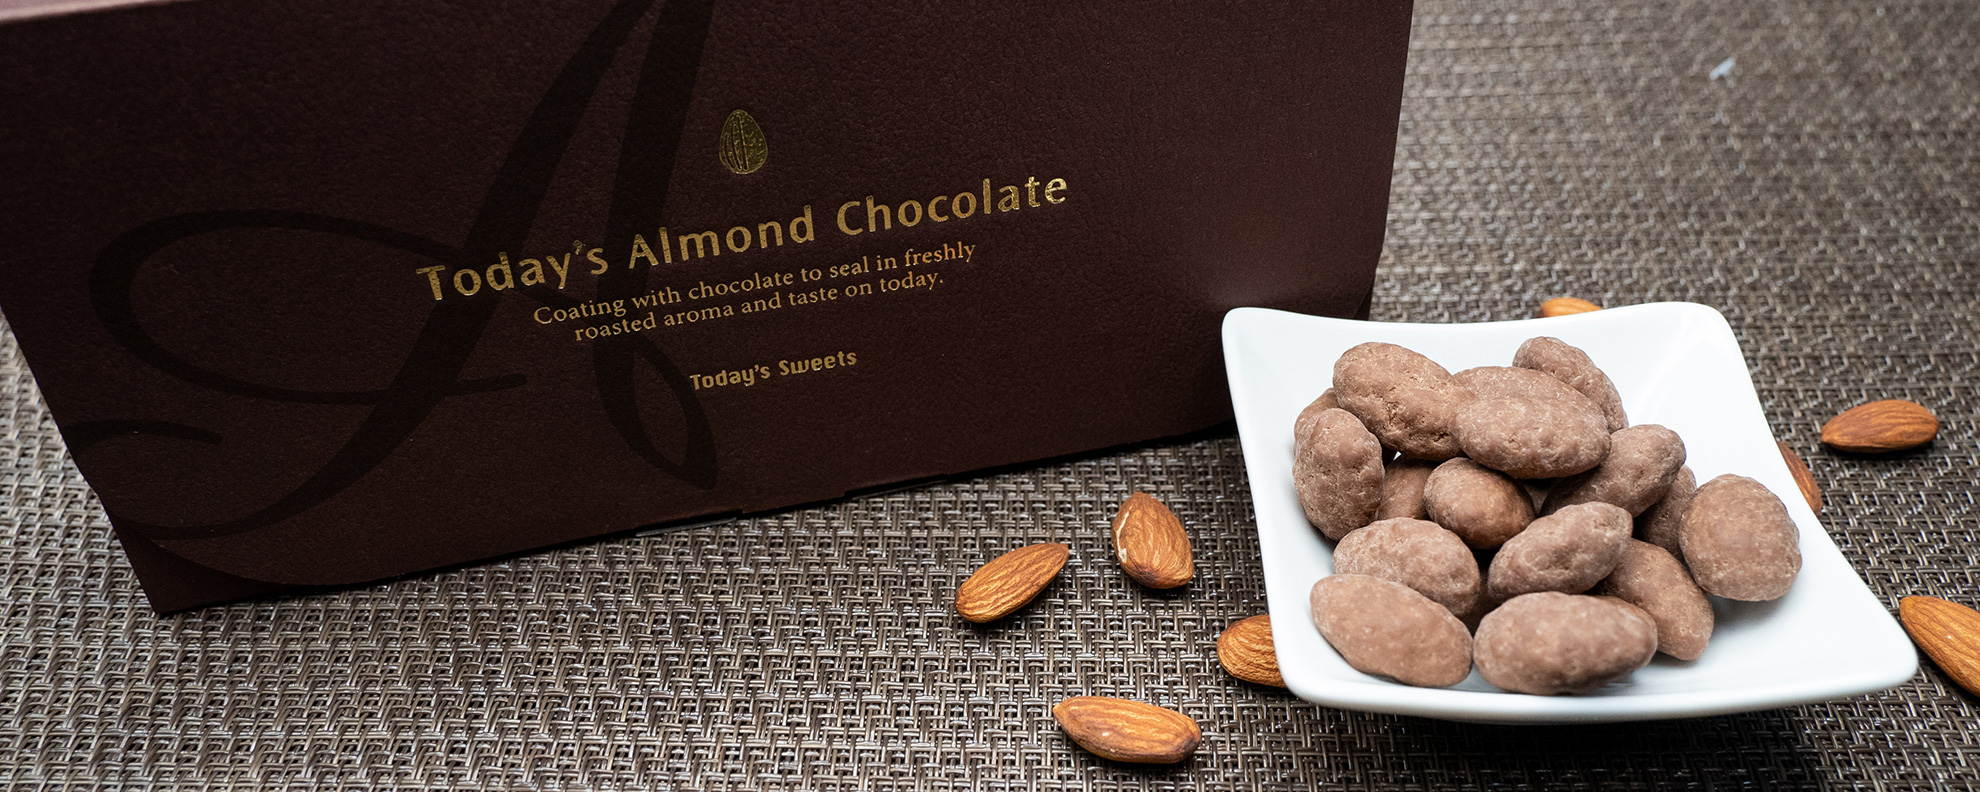 today's Almond Chocolate